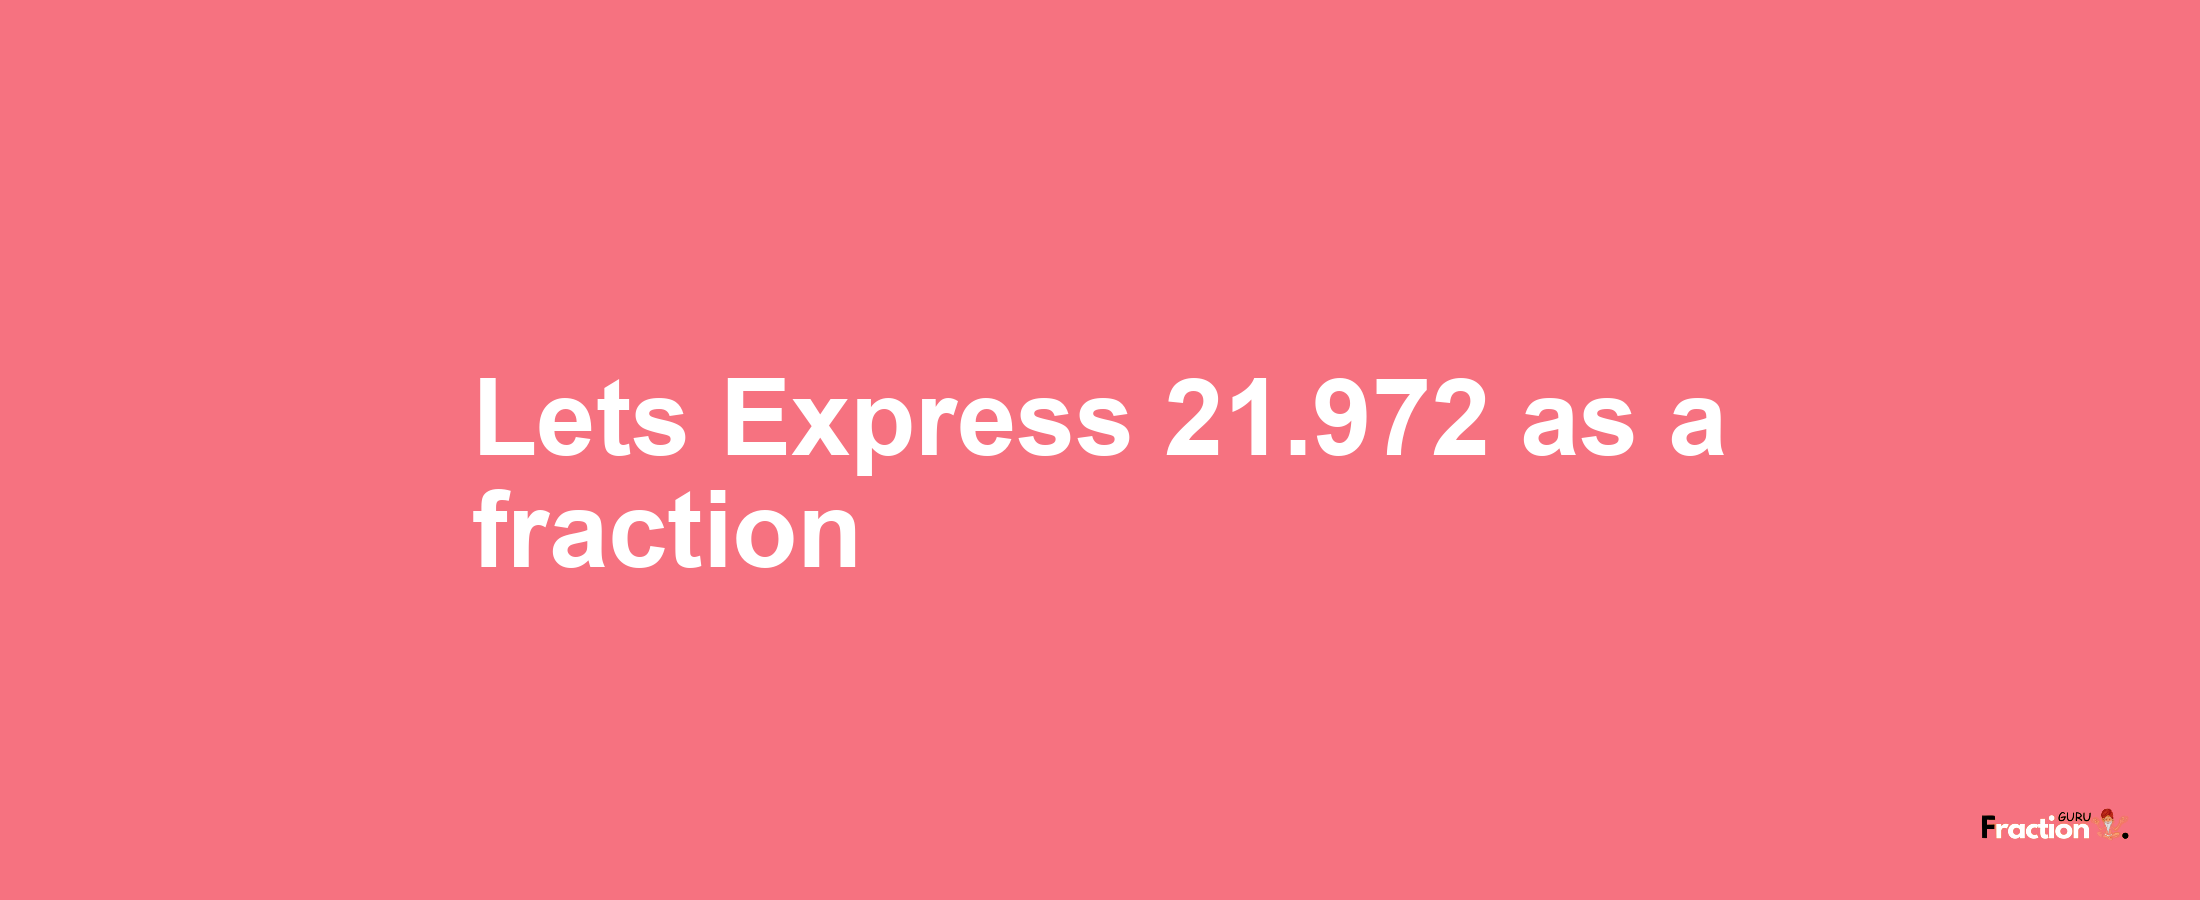 Lets Express 21.972 as afraction